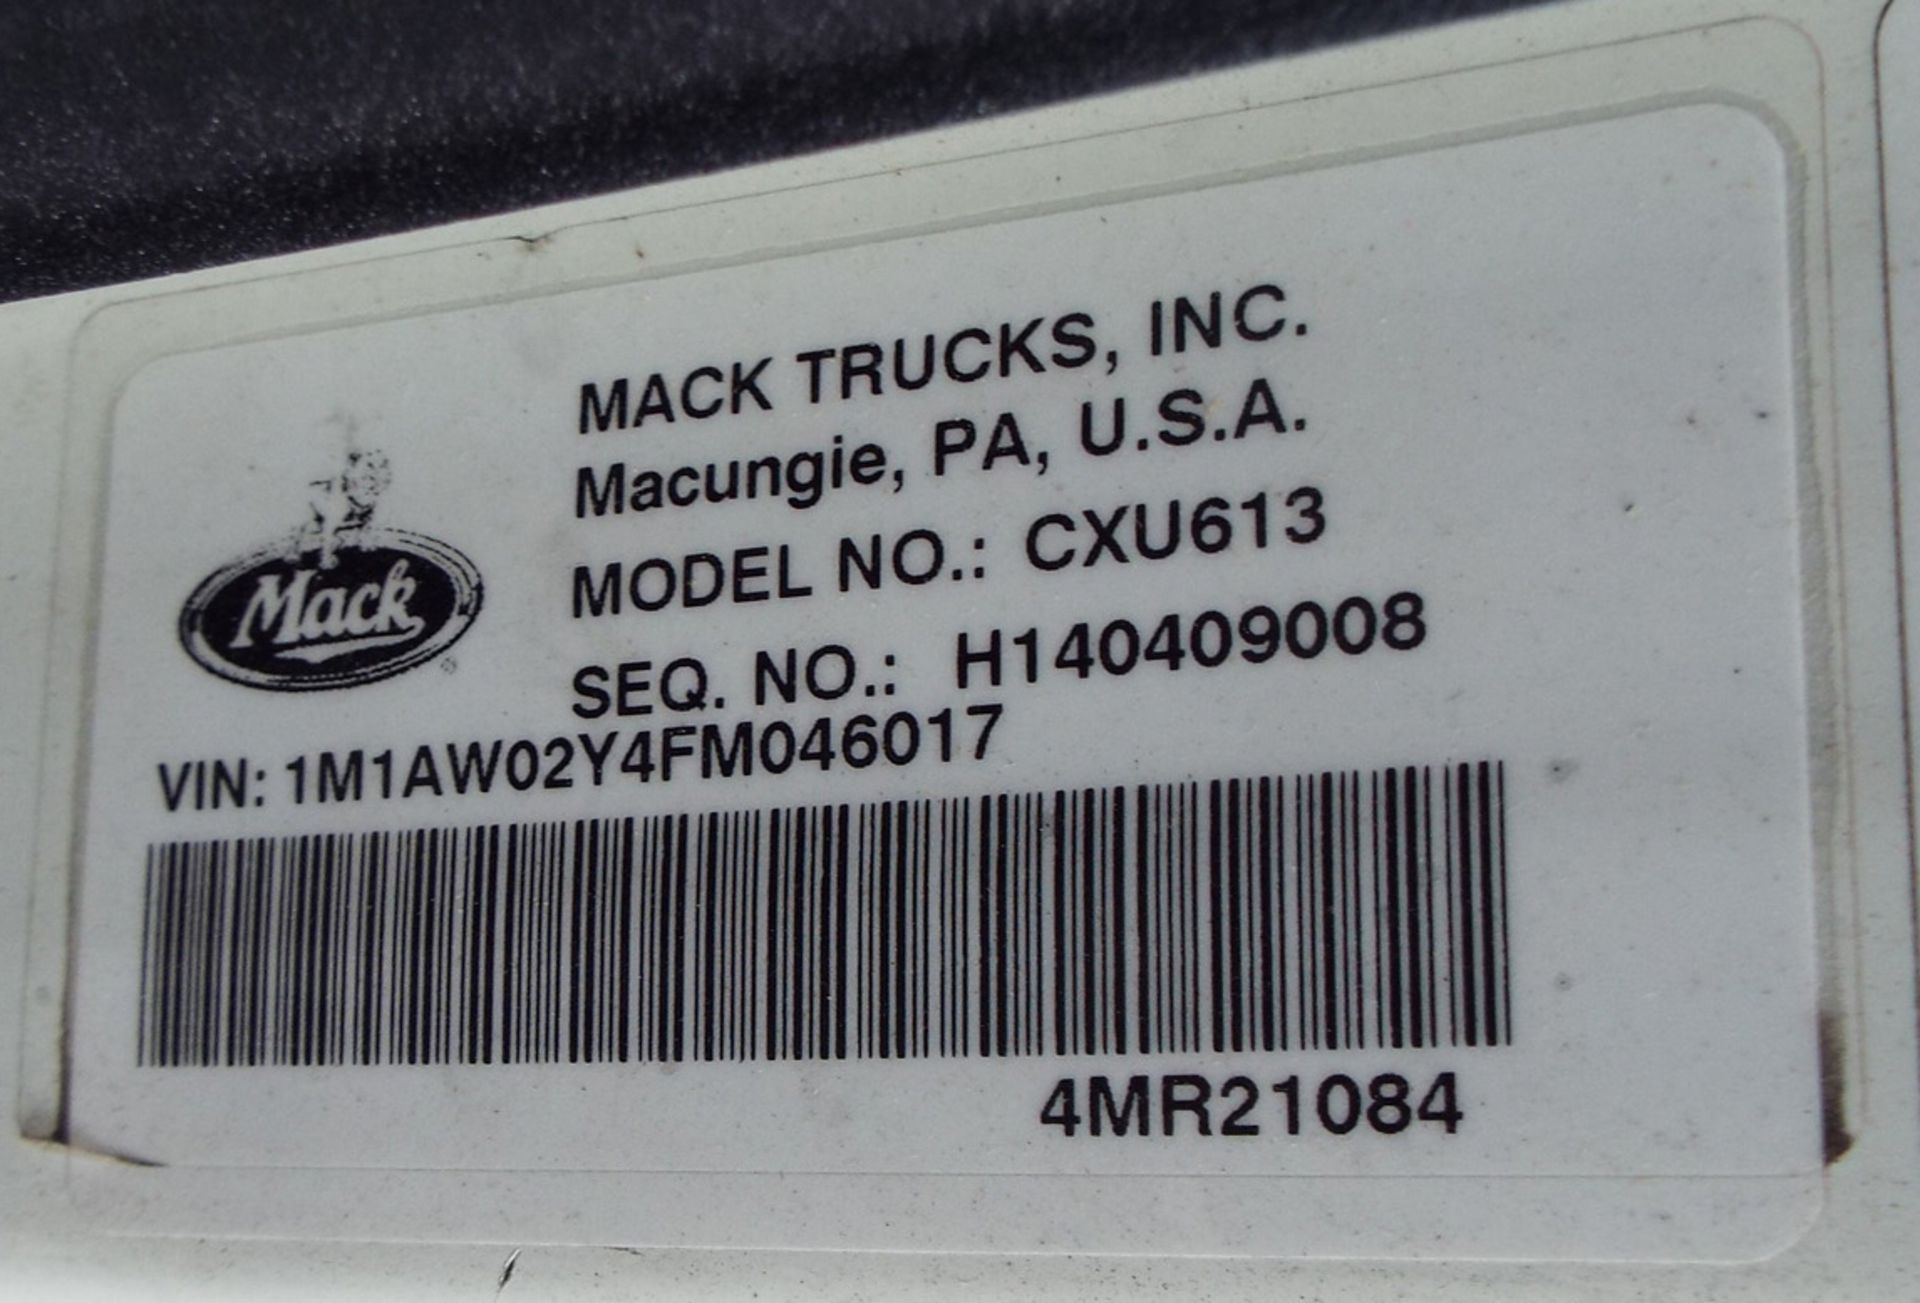 MACK (2015) CXU613 DAY CAB TRUCK WITH 405HP MP7 DIESEL ENGINE, 10 SPEED EATON FULLER TRANSMISSION, - Image 13 of 13